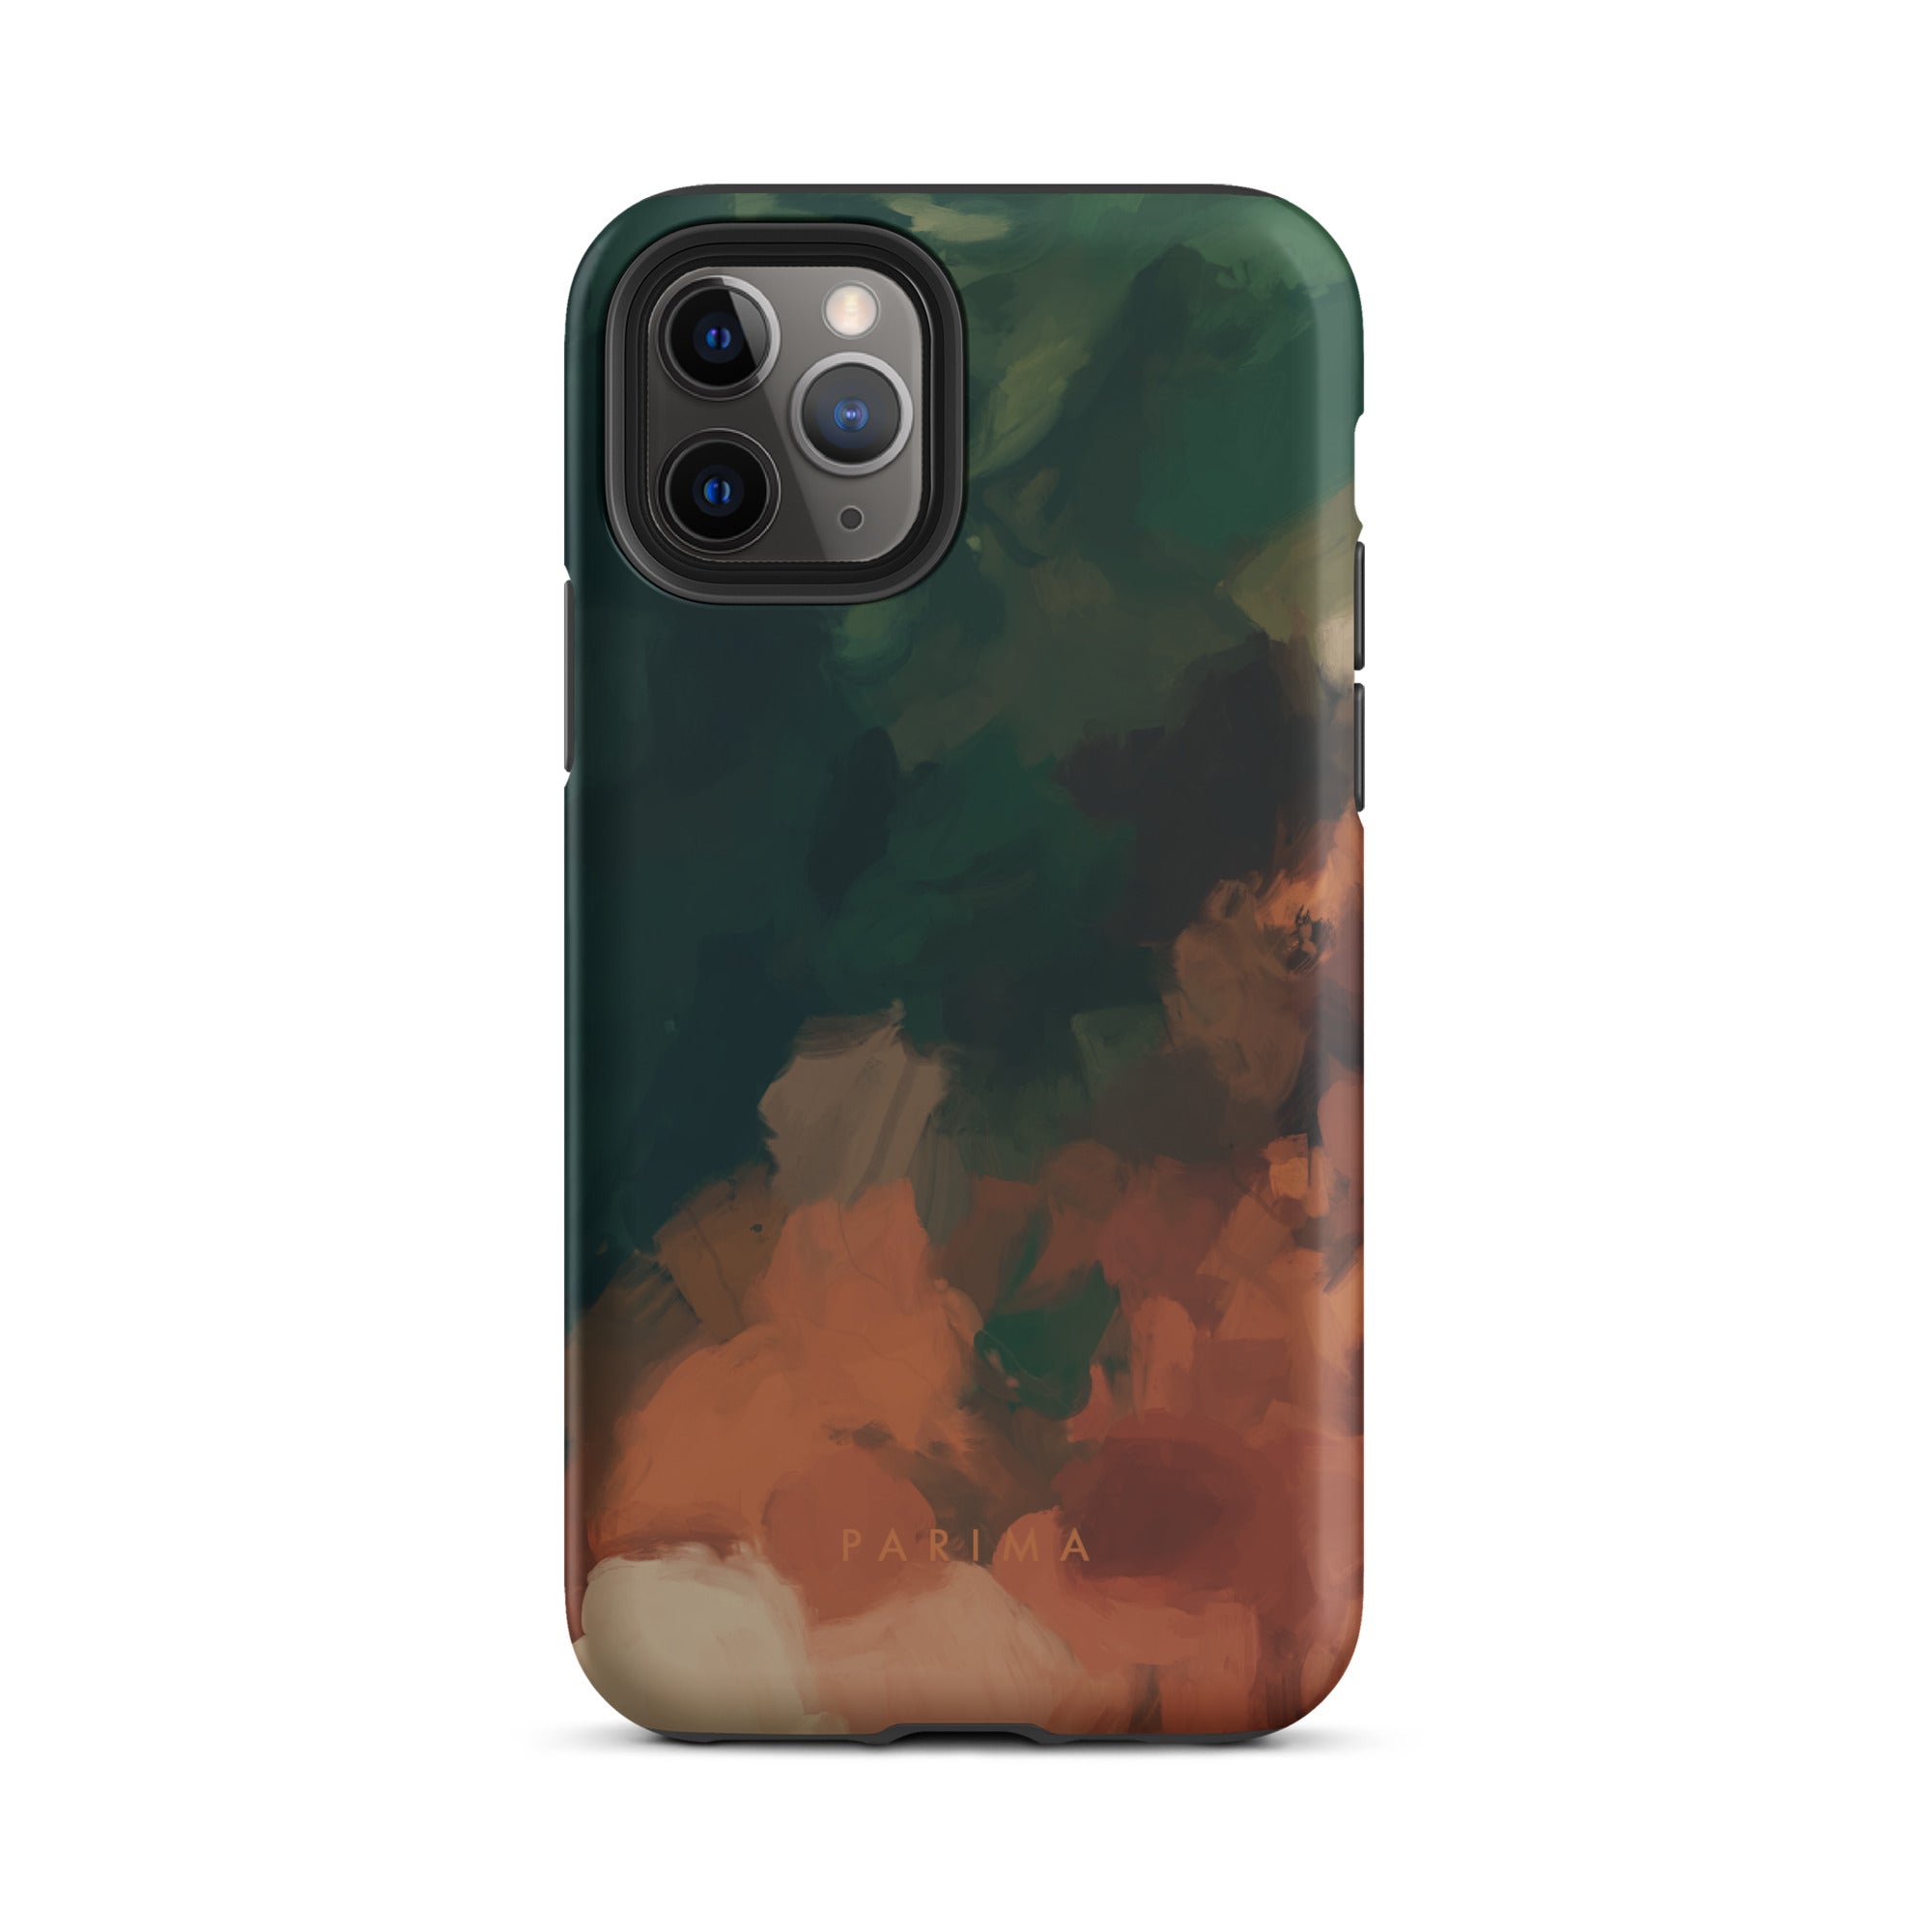 Cedar, green and brown abstract art - iPhone 11 Pro tough case by Parima Studio